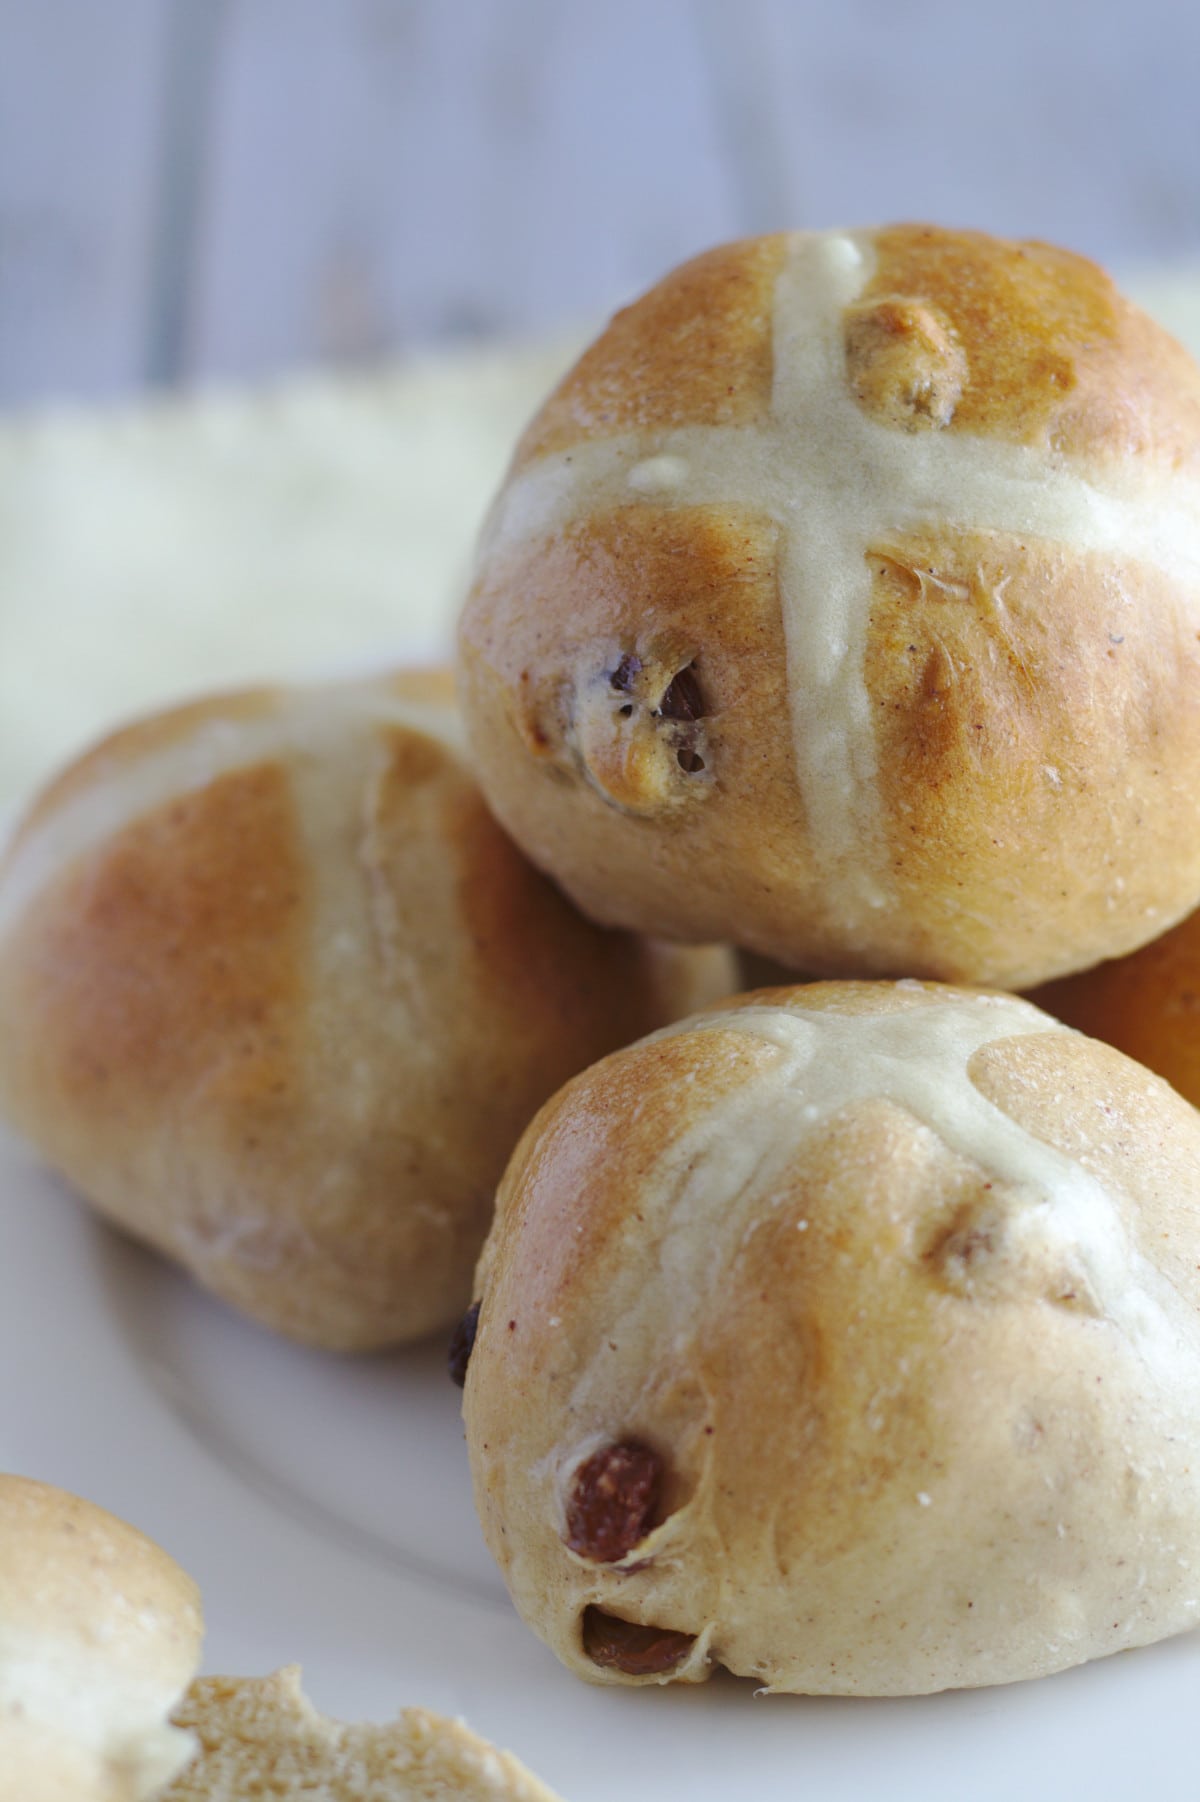 A plate of buns.